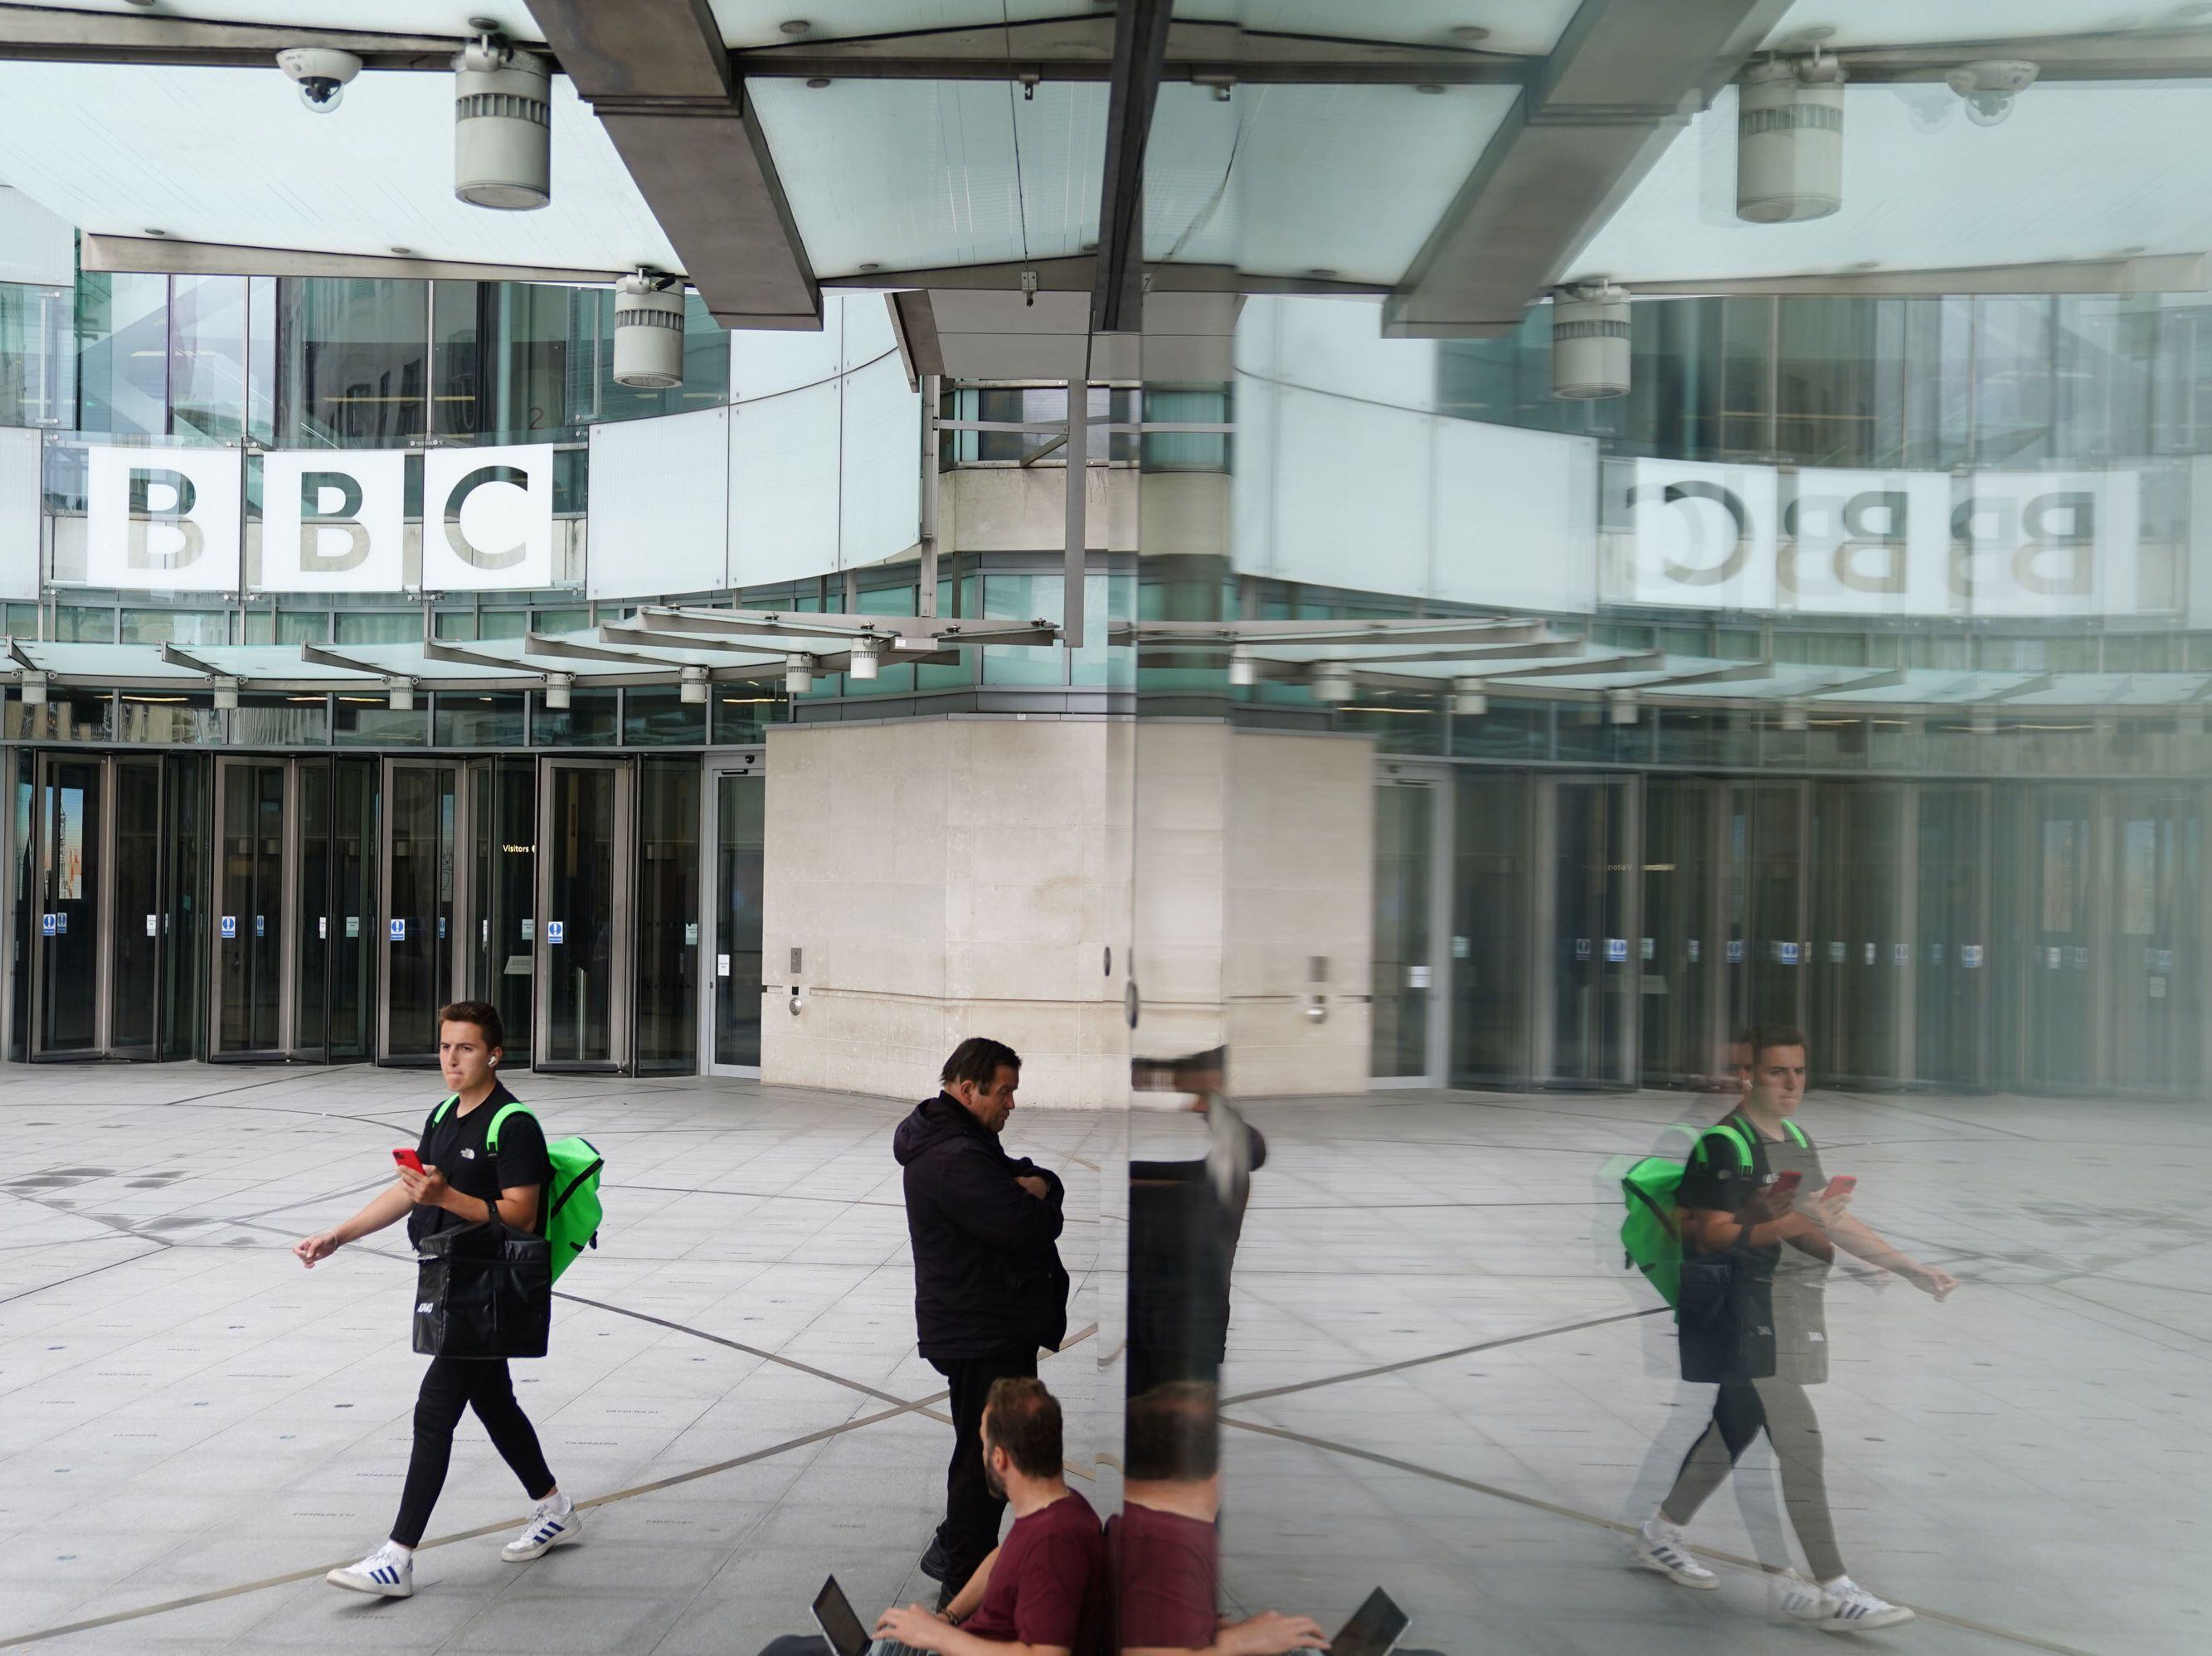 BBC ordered to consider impact of its latest moves on local newspaper websites